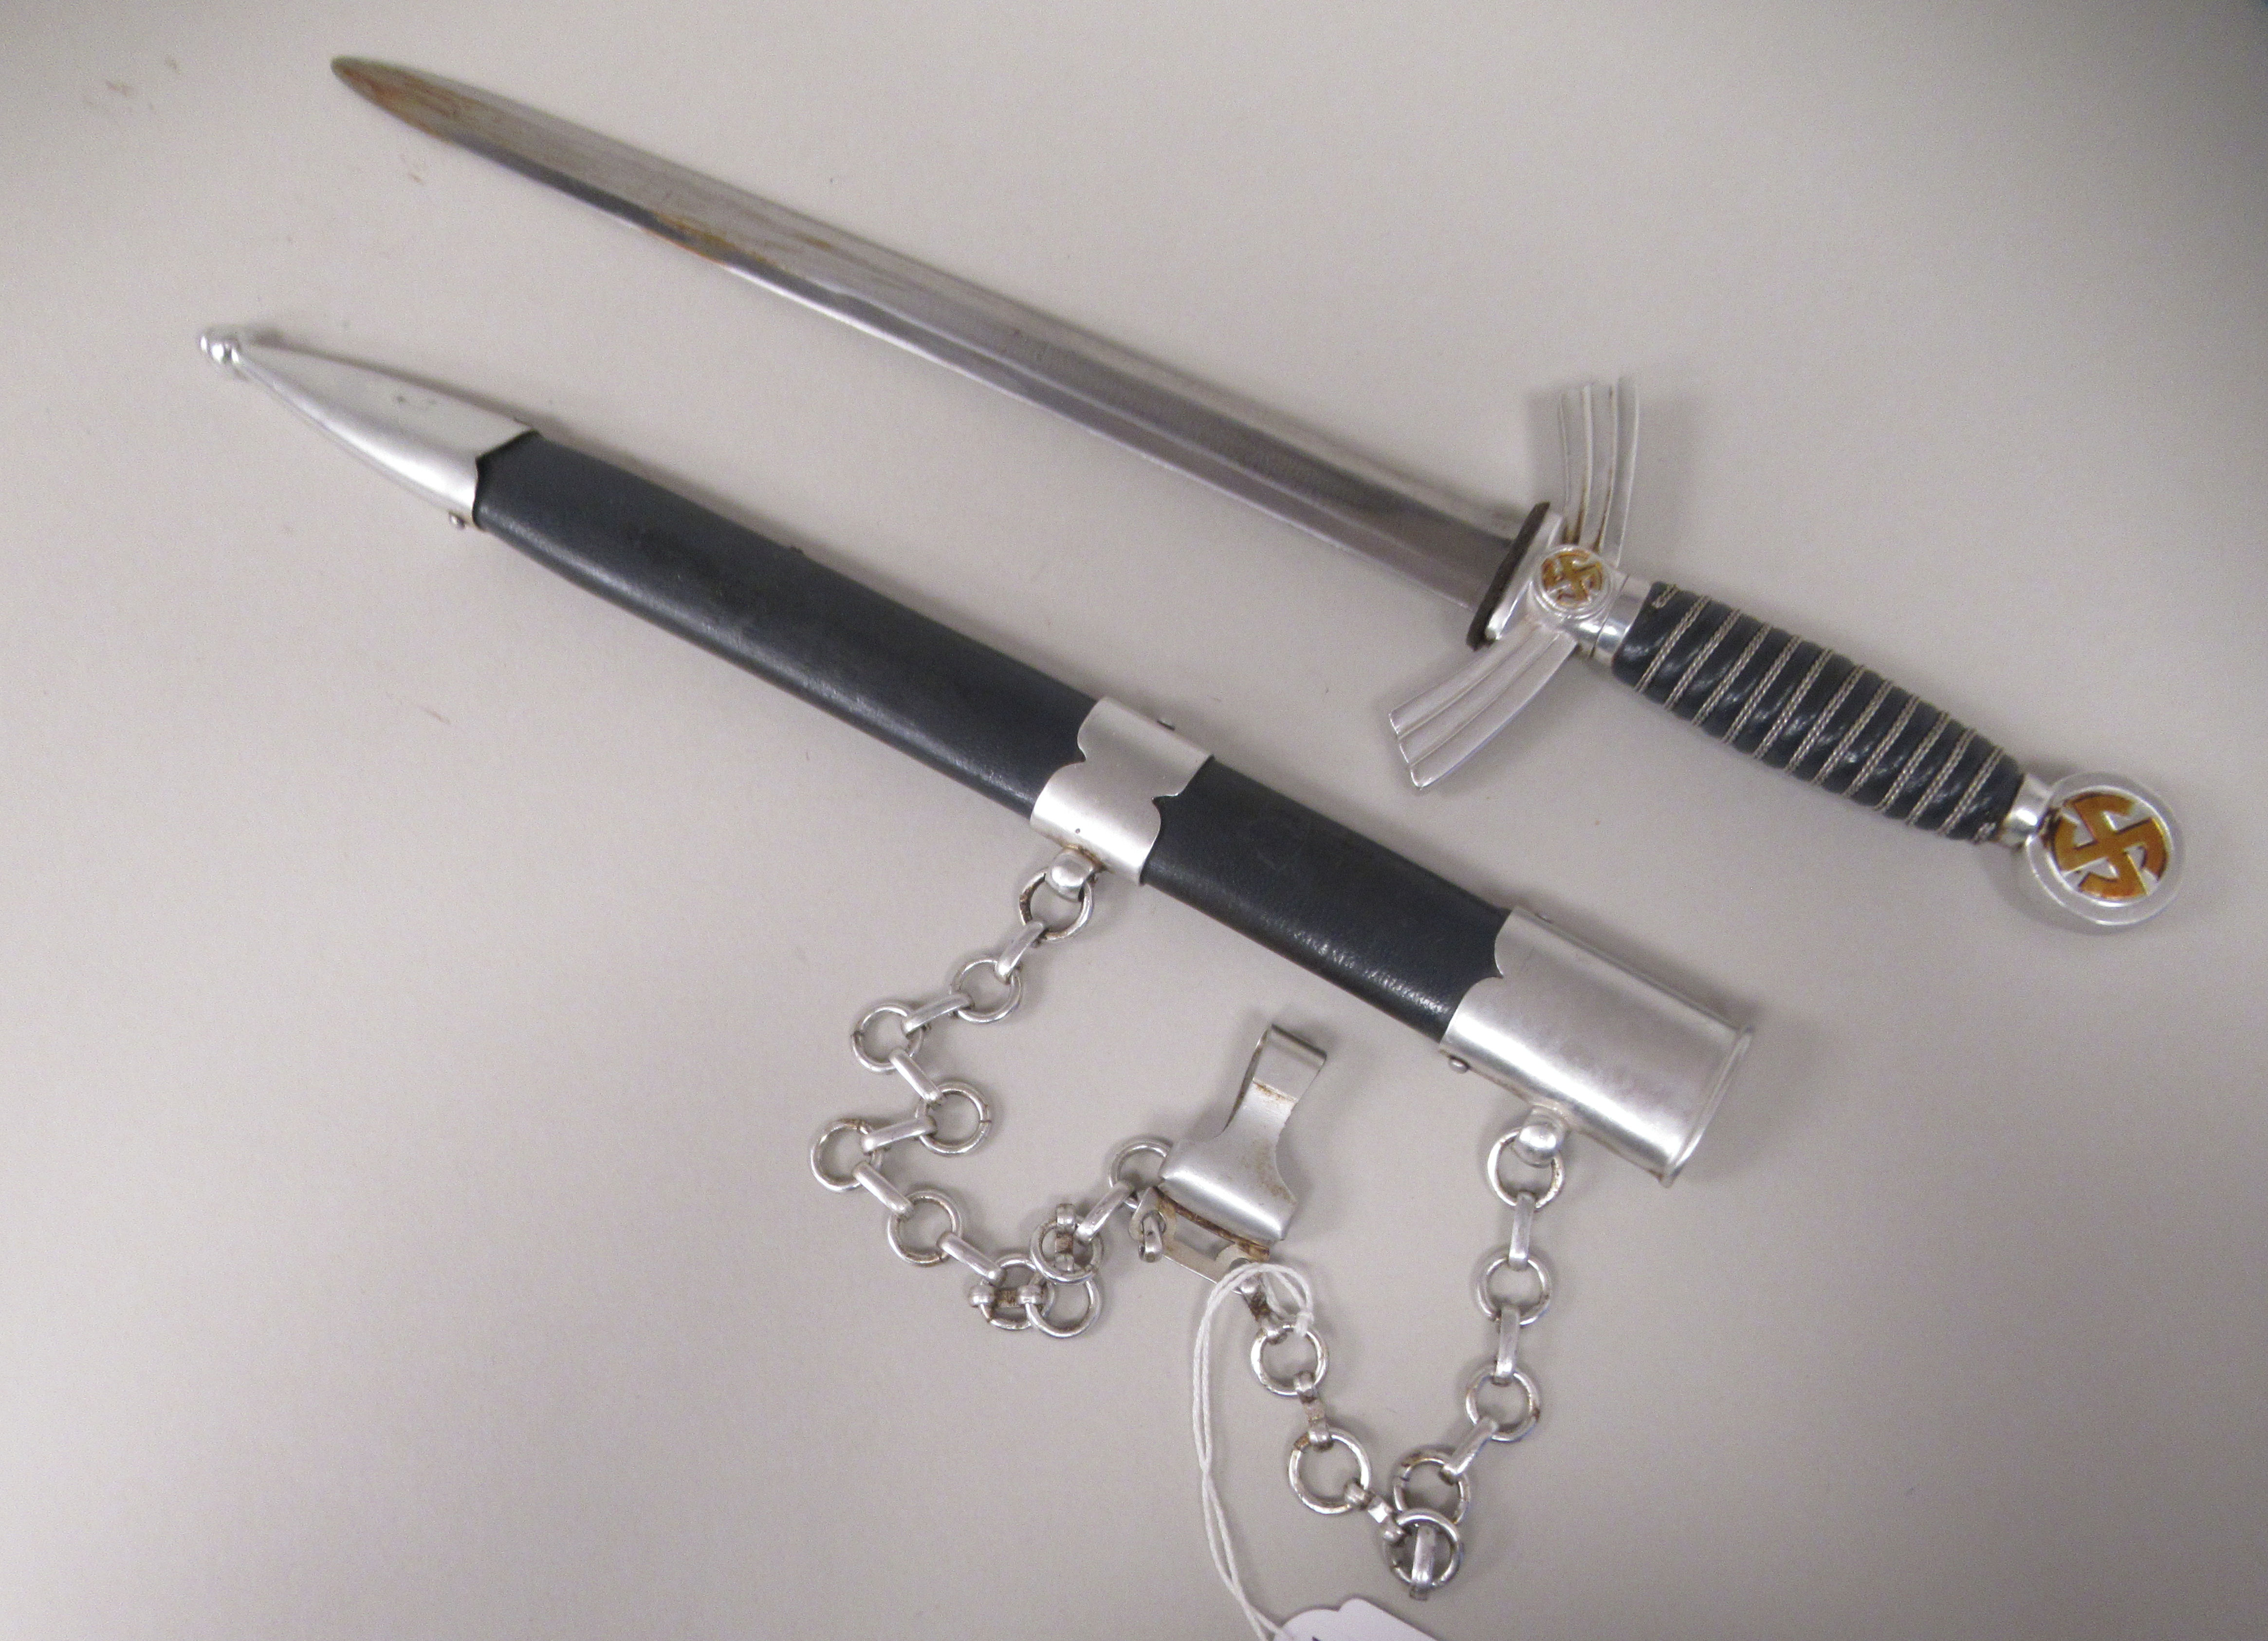 A German SS dress dagger with swastika emblems on the pommel and hilt and a woven wire band